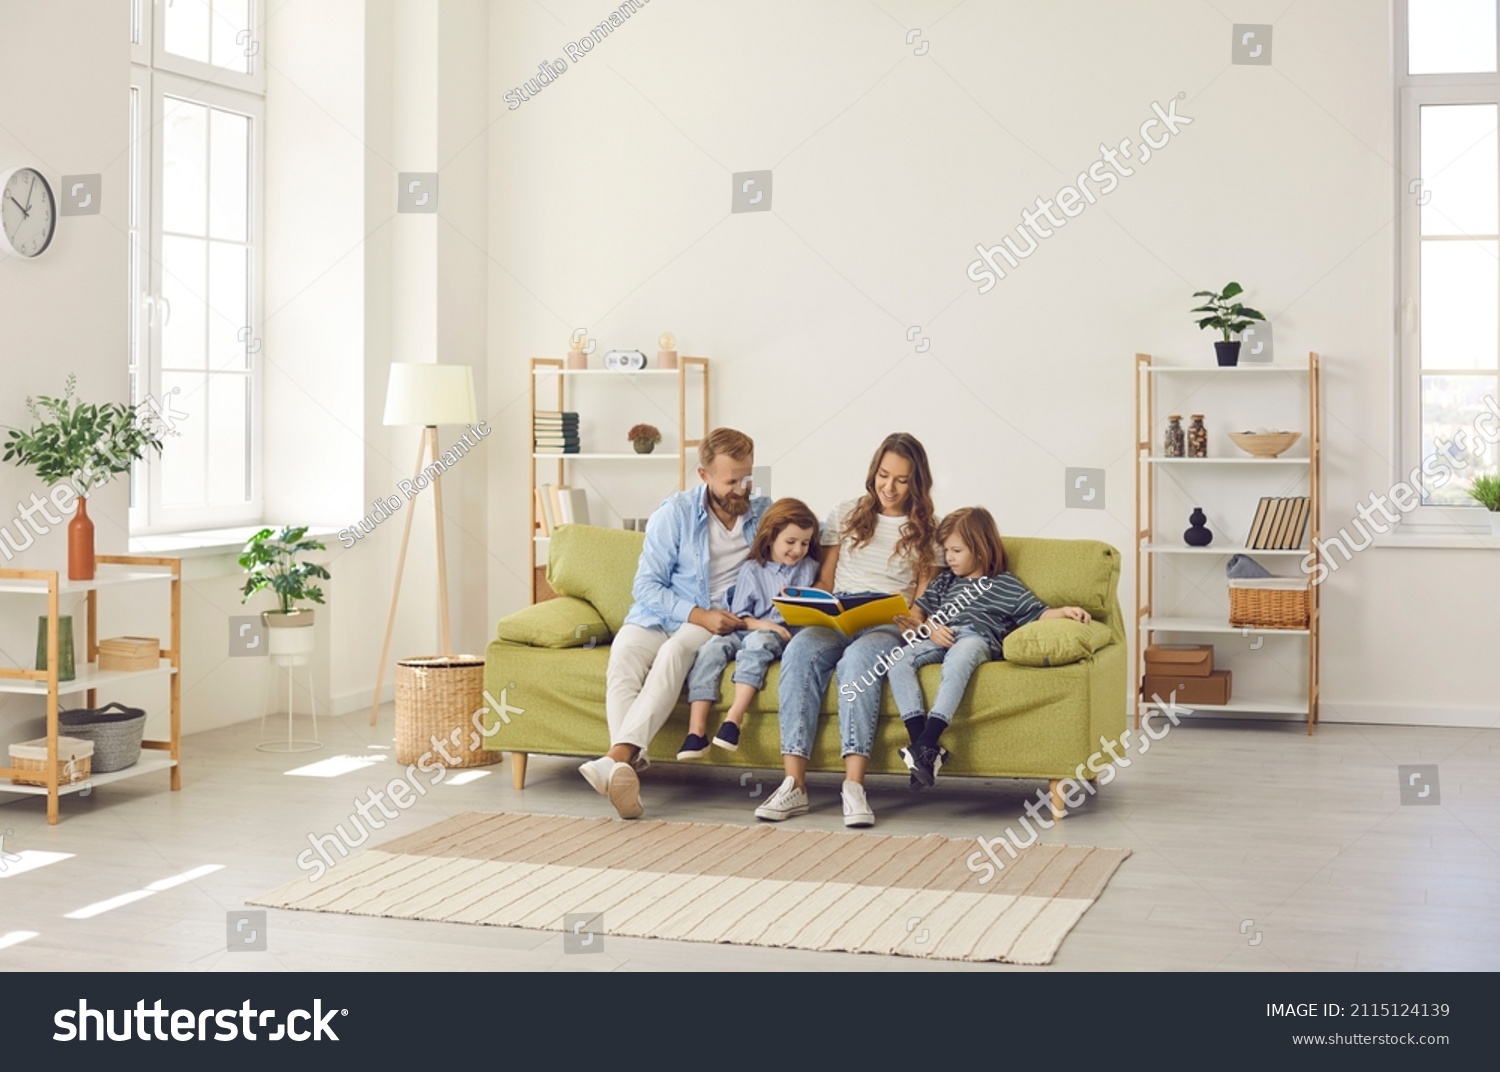 Happy family spending time at home. Mum, dad and little kids reading book while sitting together on green sofa in room with light walls, beige rug and simple brown shelves in their big new house #2115124139